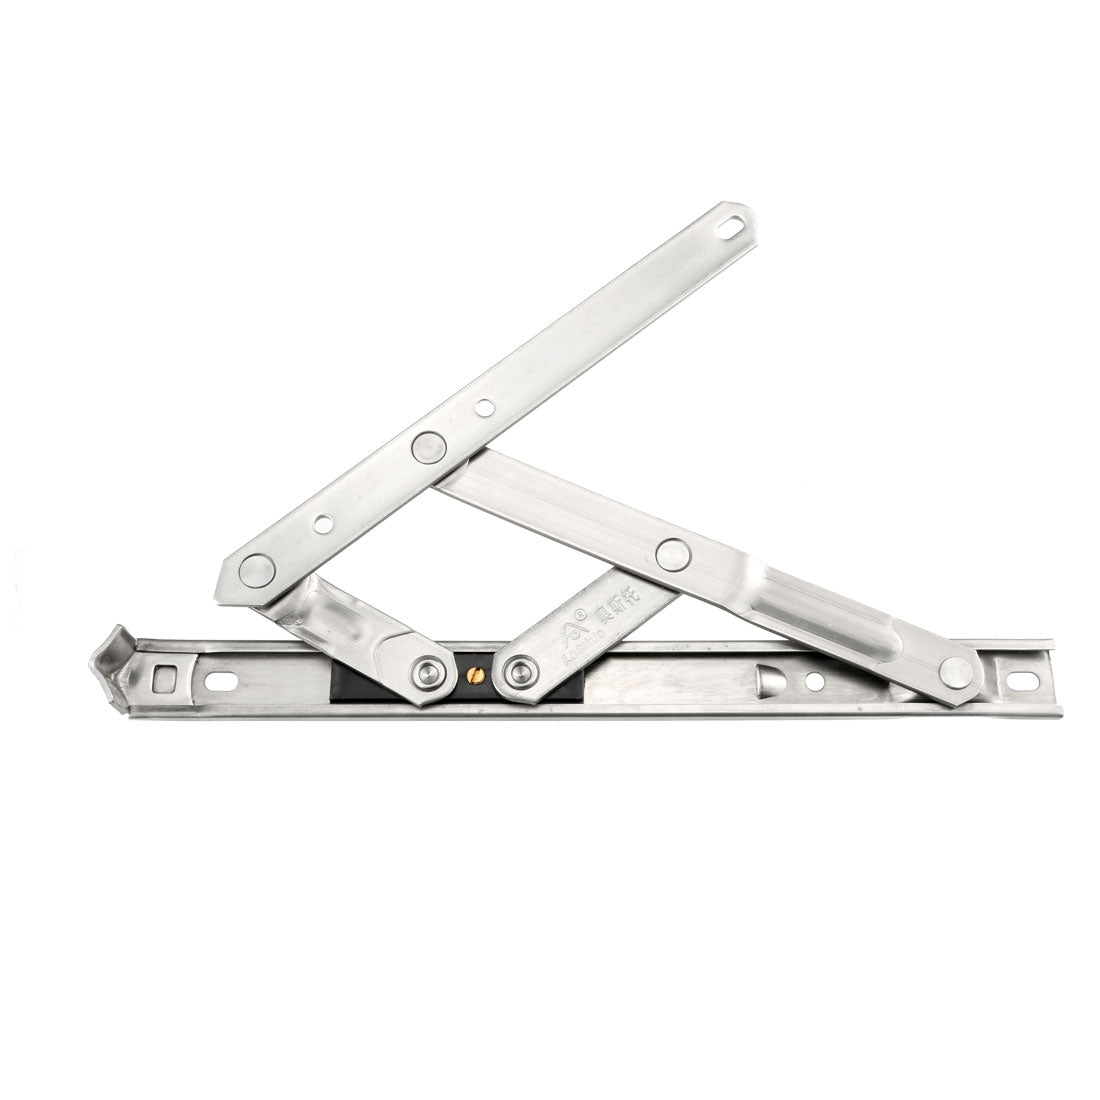 uxcell Uxcell 10-Inch Hanging/Casement Window Hinge, 202 Stainless Steel